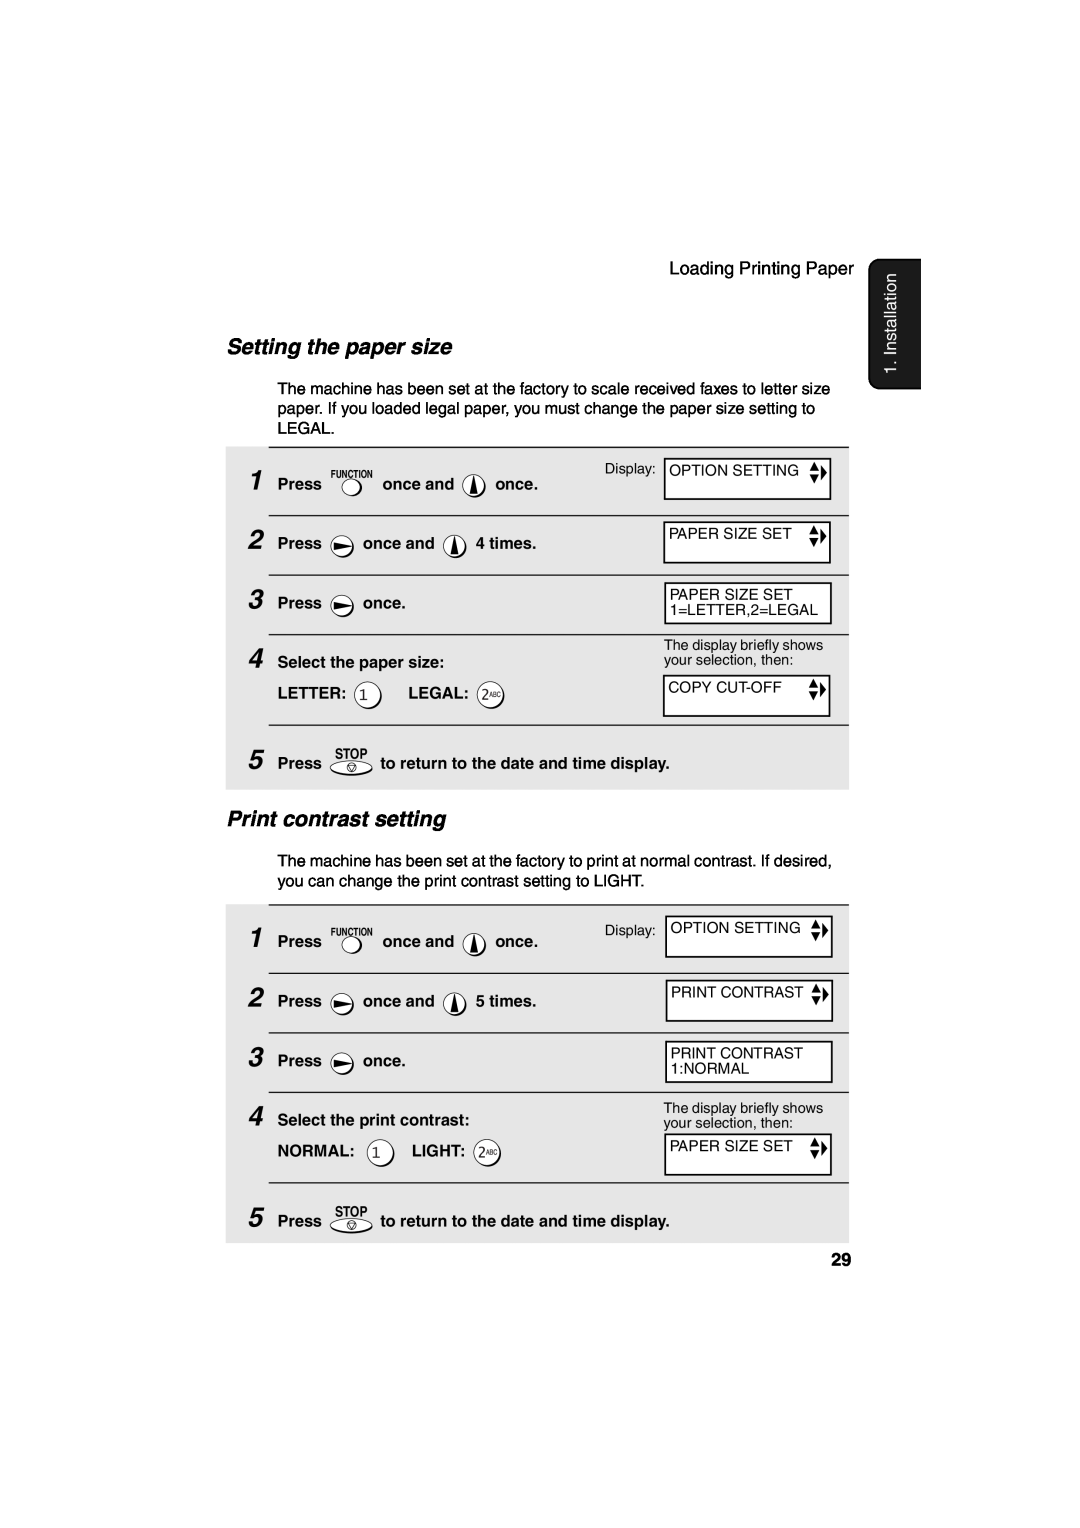 Sharp UX-CD600 operation manual Setting the paper size, Print contrast setting, Installation, Legal 